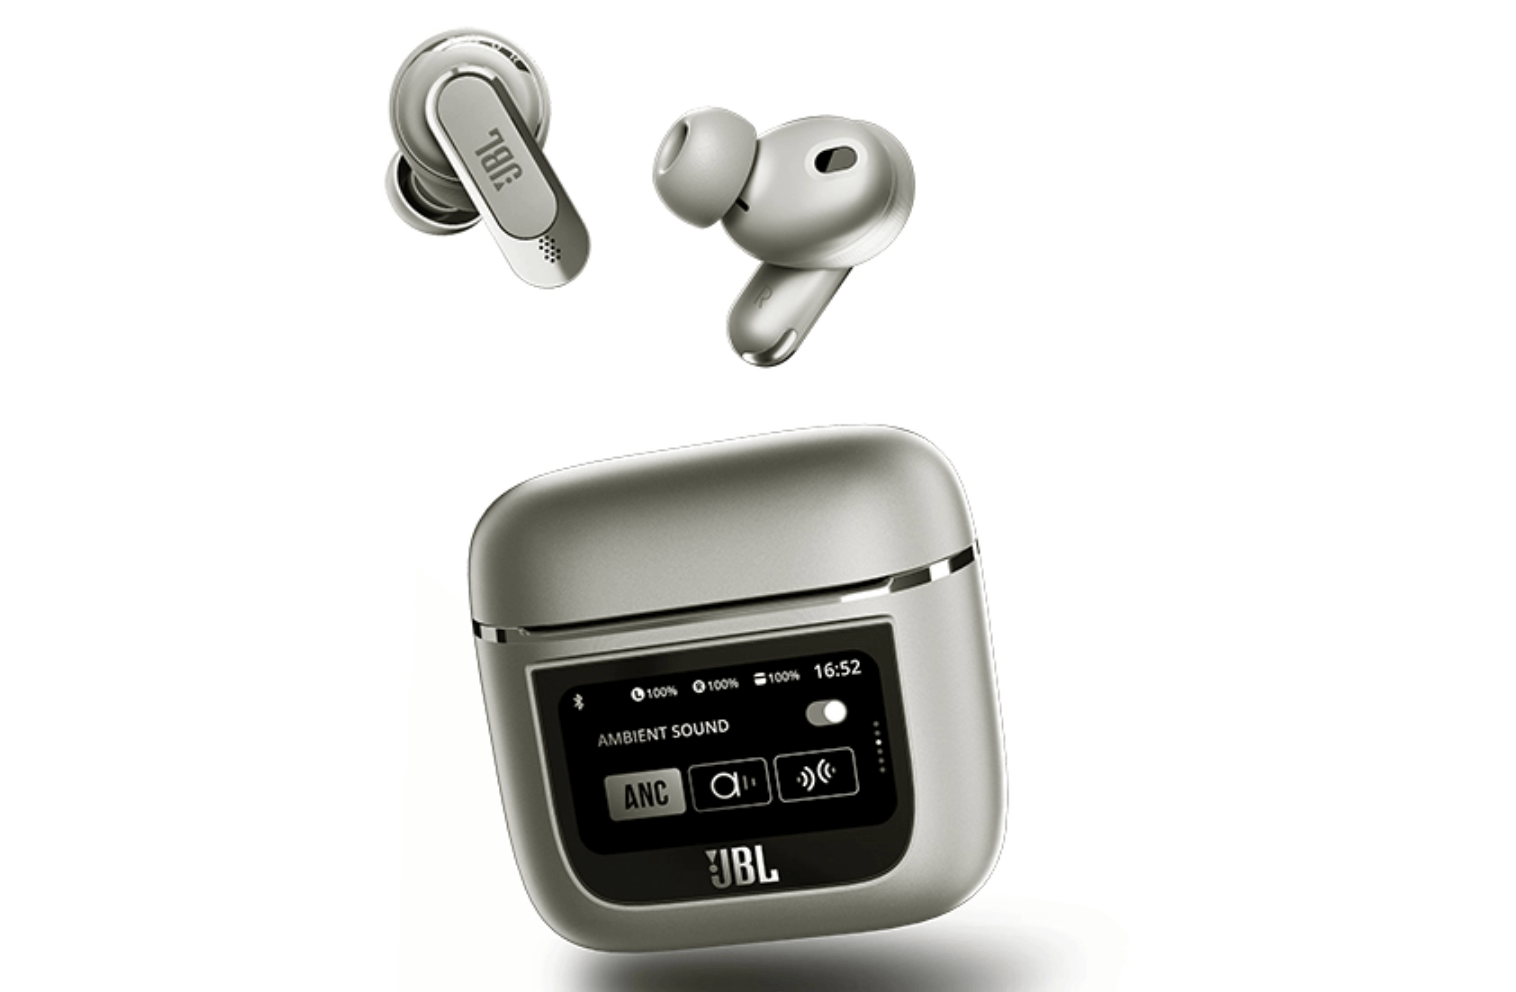  JBL Tour Pro 2 (Champagne) - True Wireless Noise Cancelling  Earbuds : Sports & Outdoors